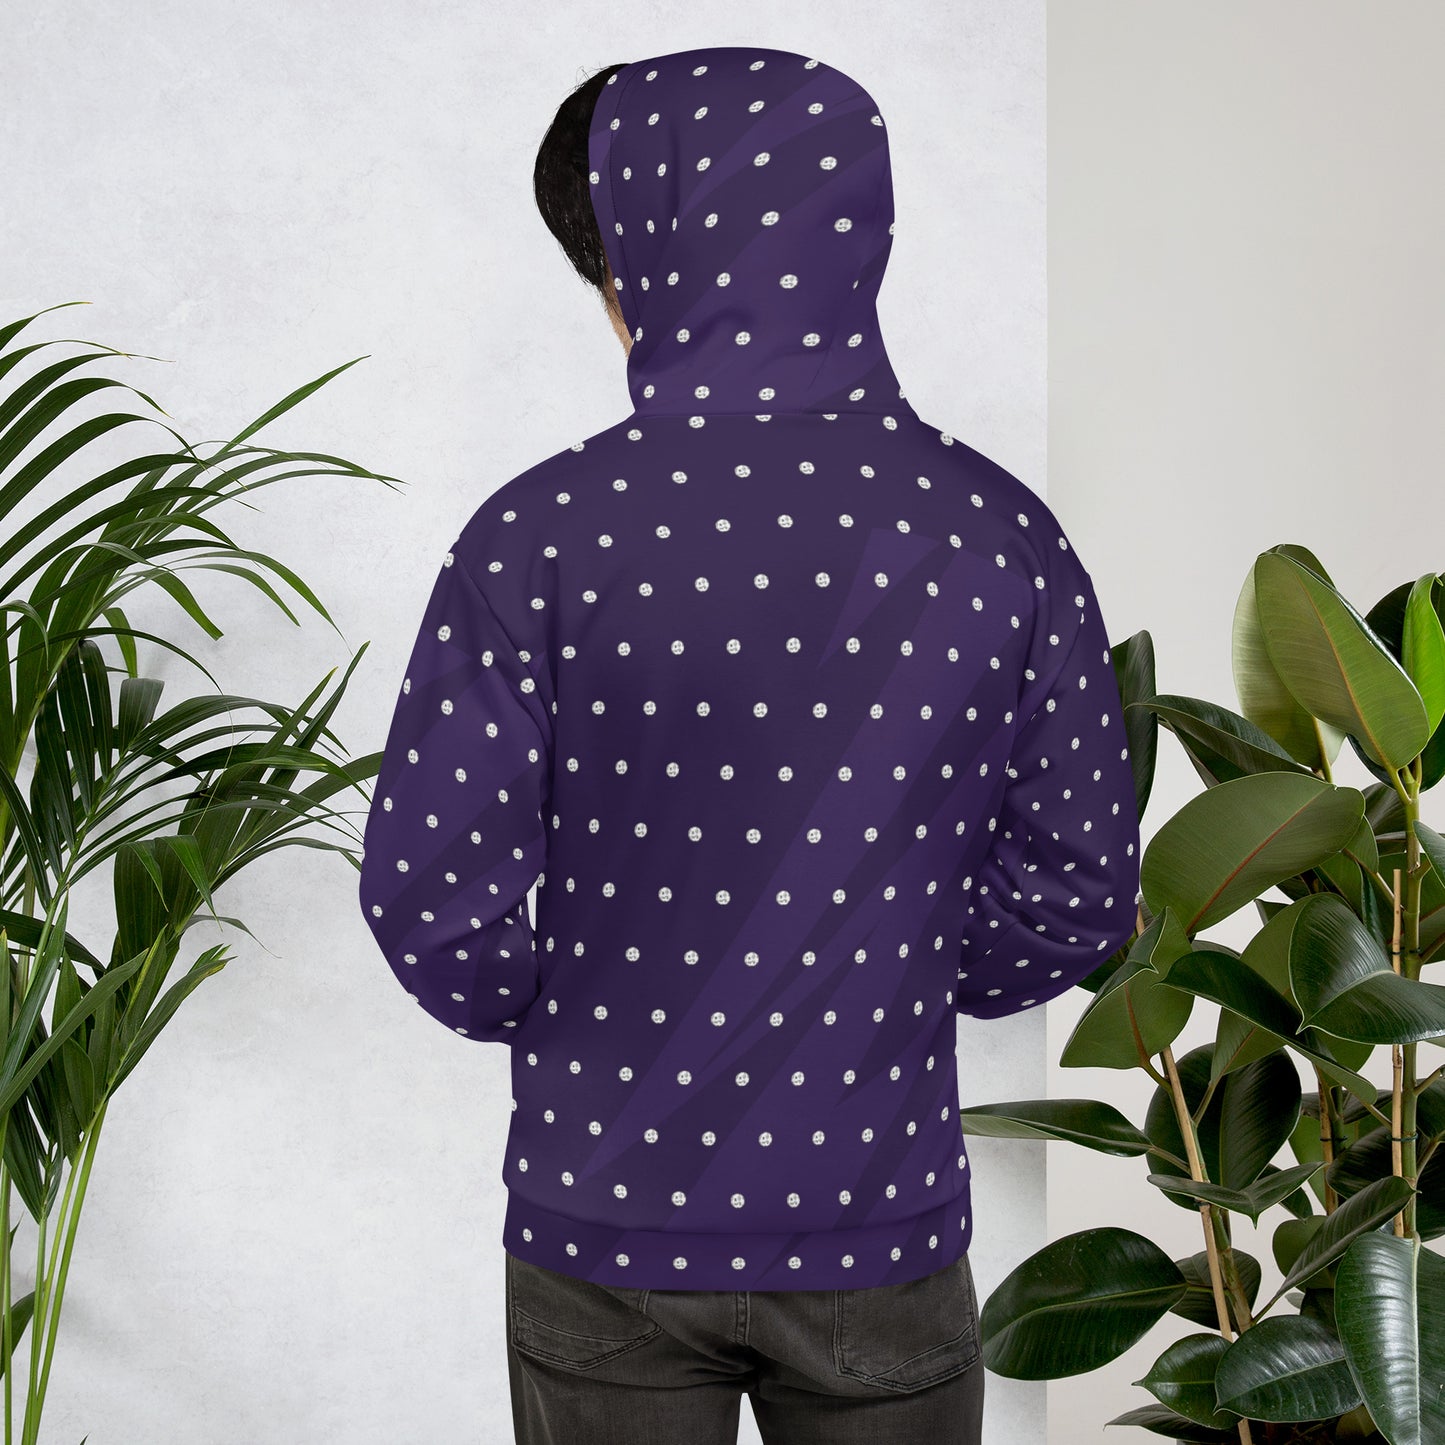 SpinFace AllOver Hoodie